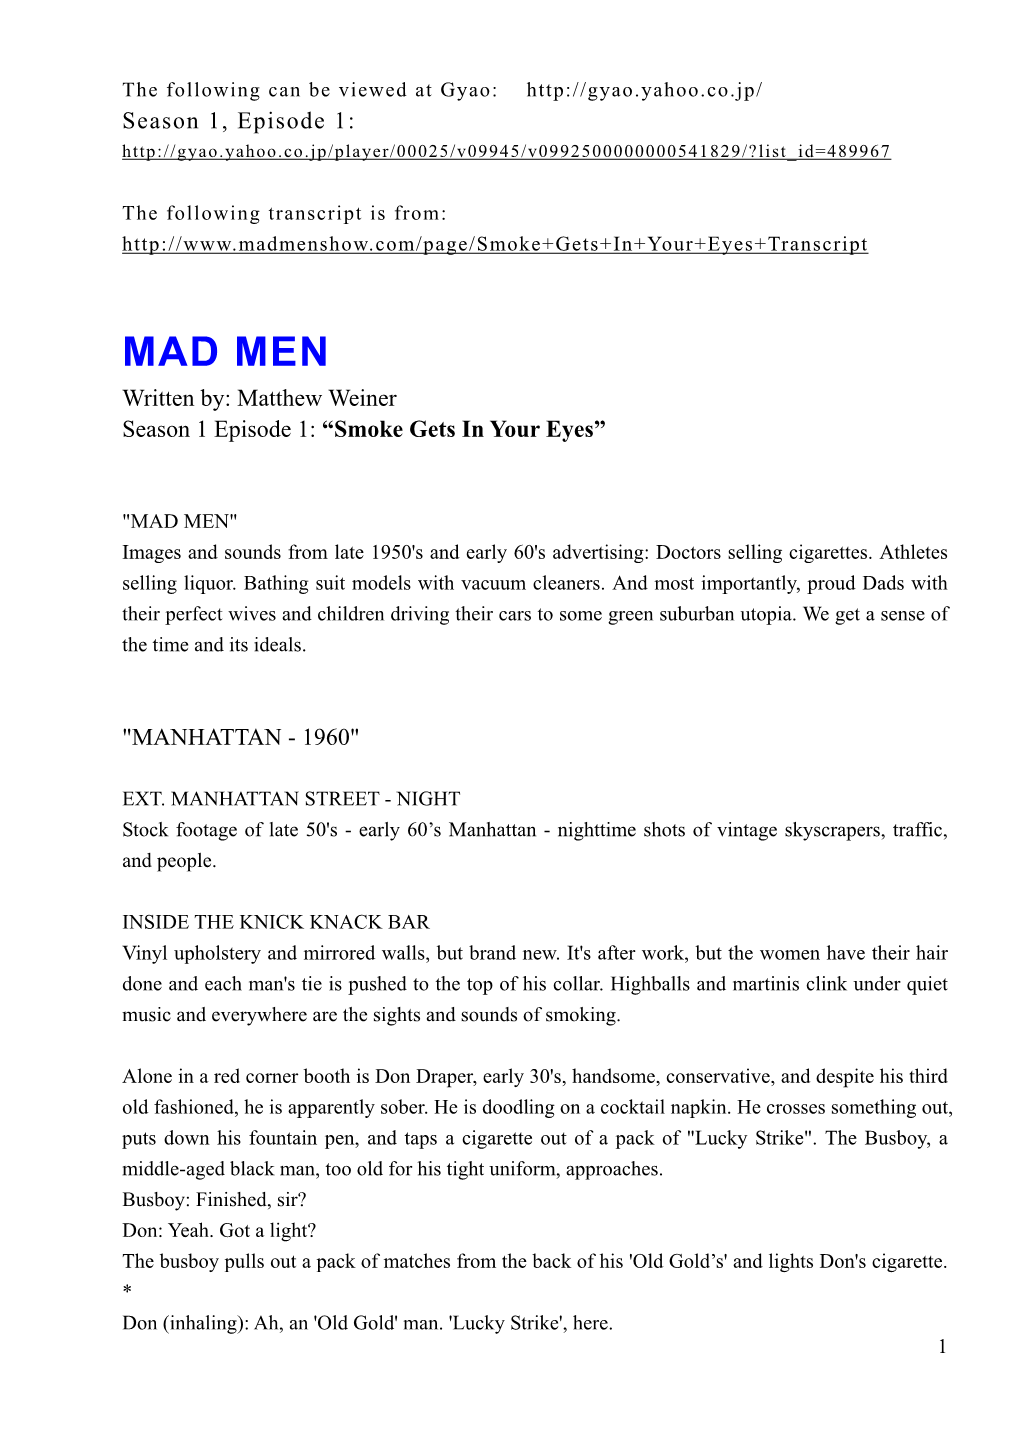 Madmenshow.Com/Page/Smoke+Gets+In+Your+Eyes+Transcript